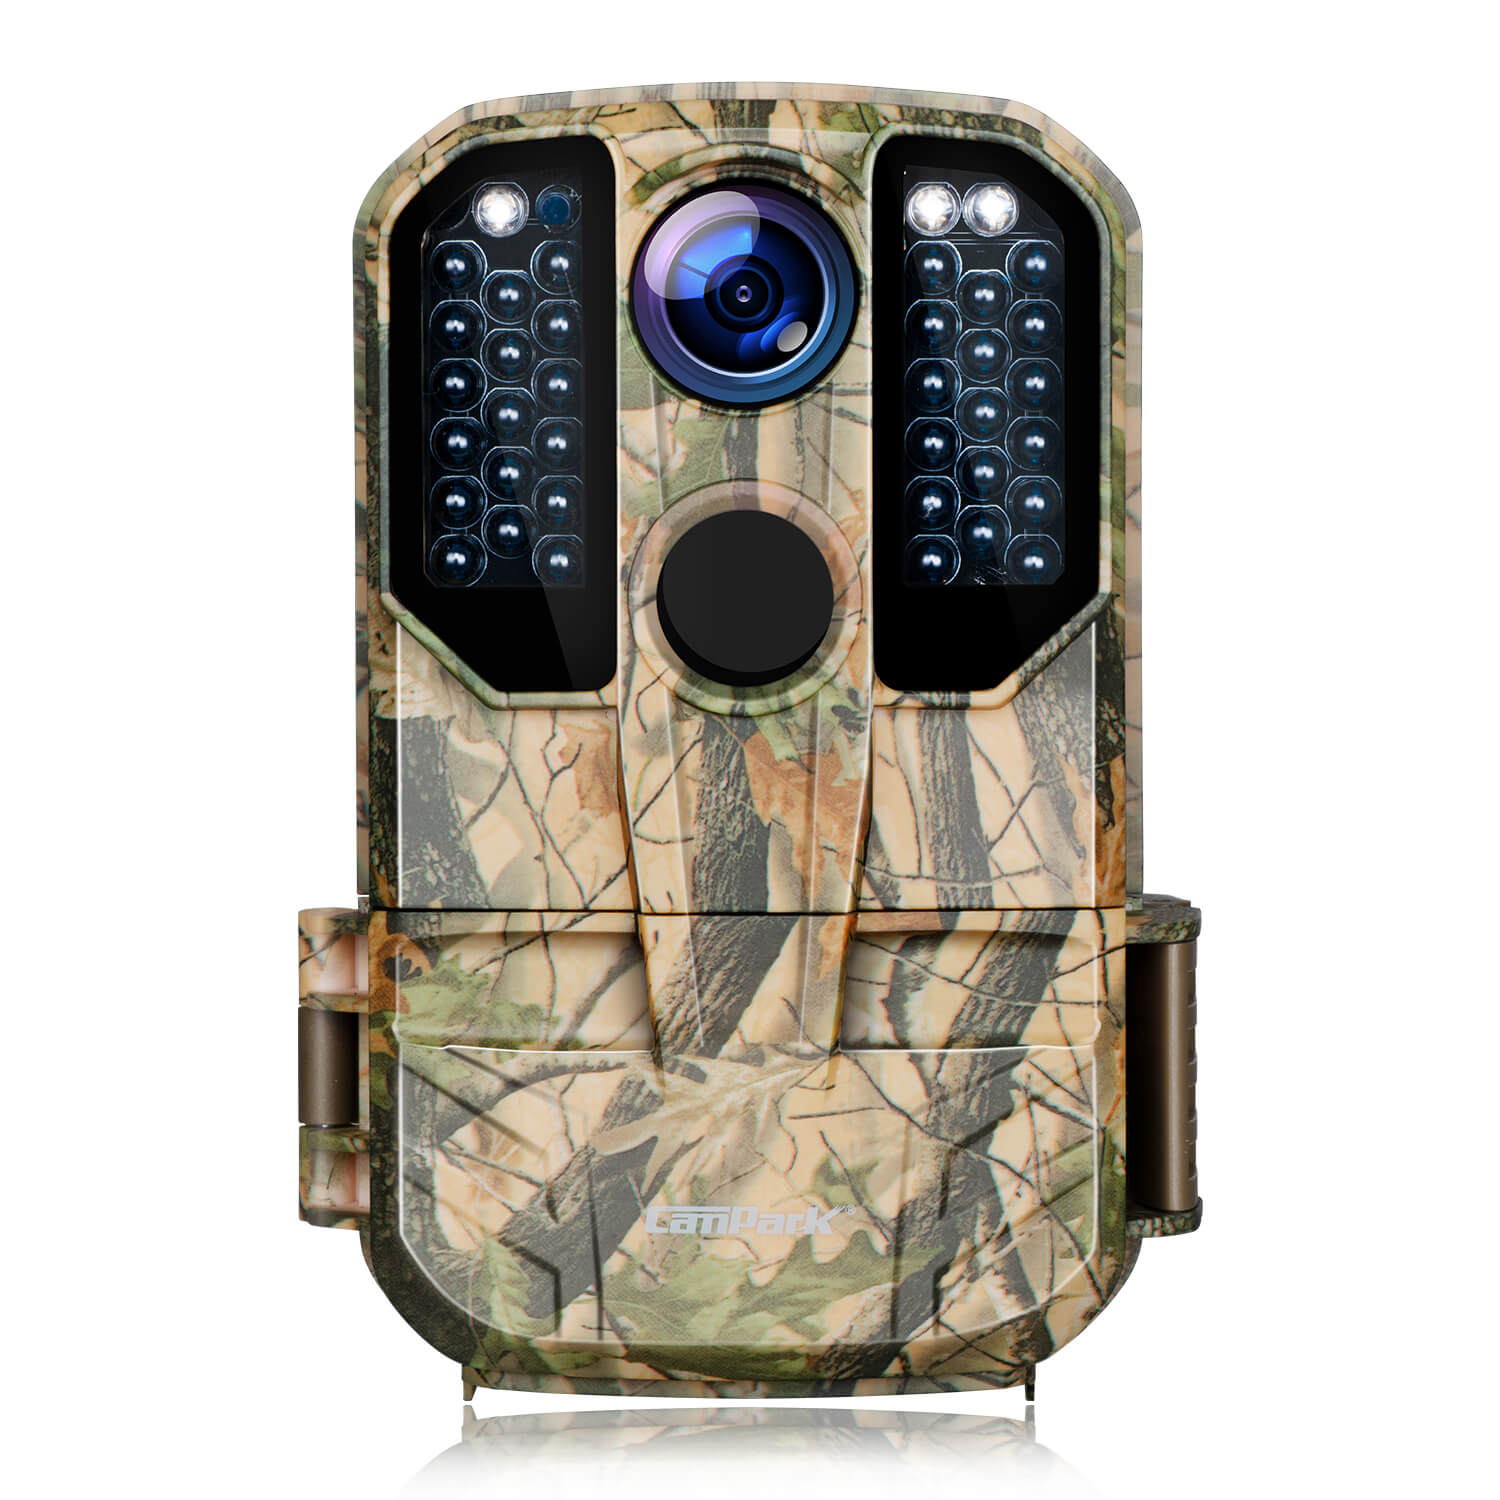 Campark T75 WiFi Trail Camera 20MP 1296P Remote Control Hunting Game Camera(Only available in Europe）